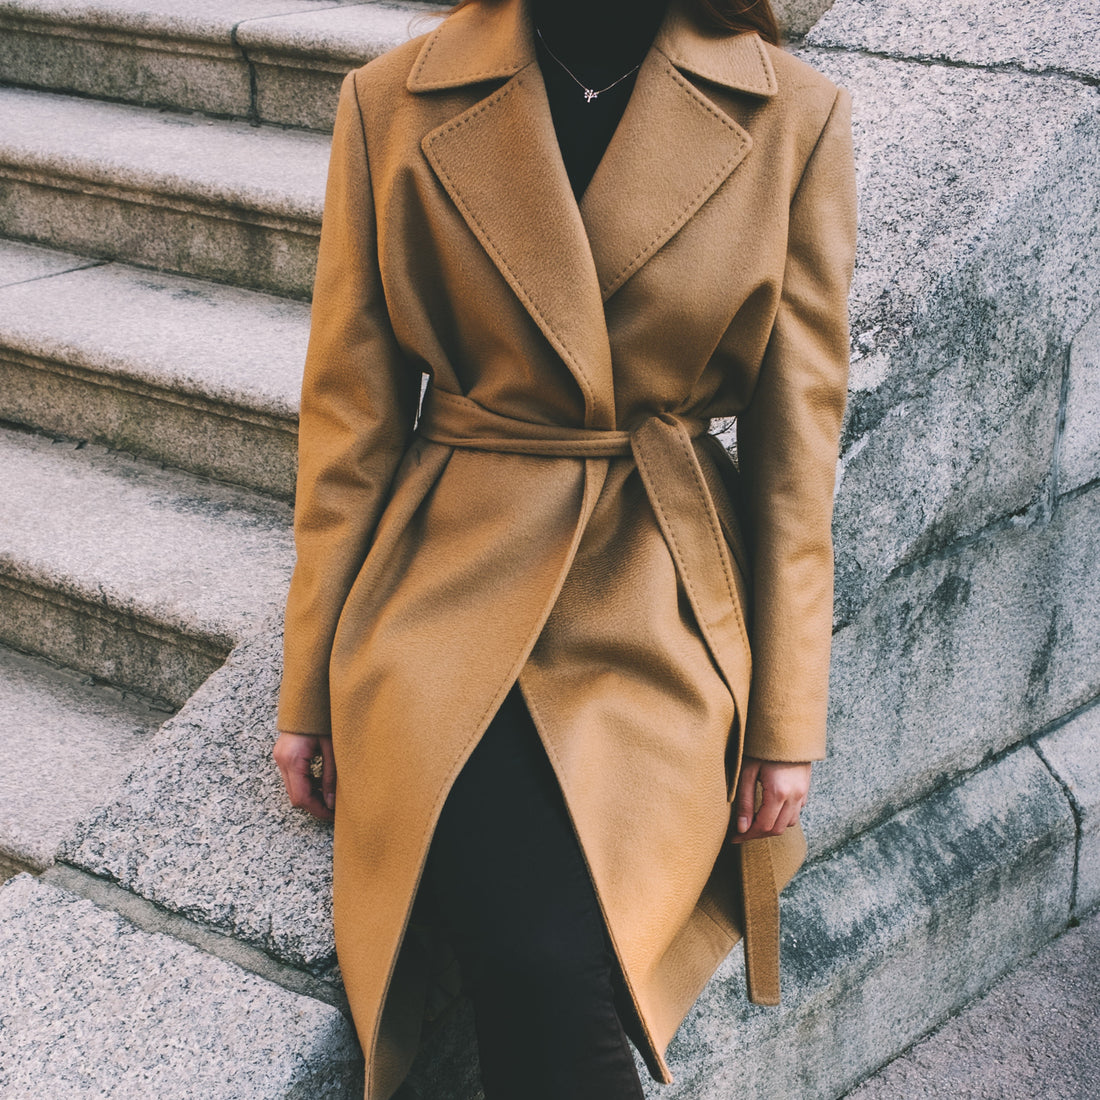 Winter Coat Style Inspiration from Influencers